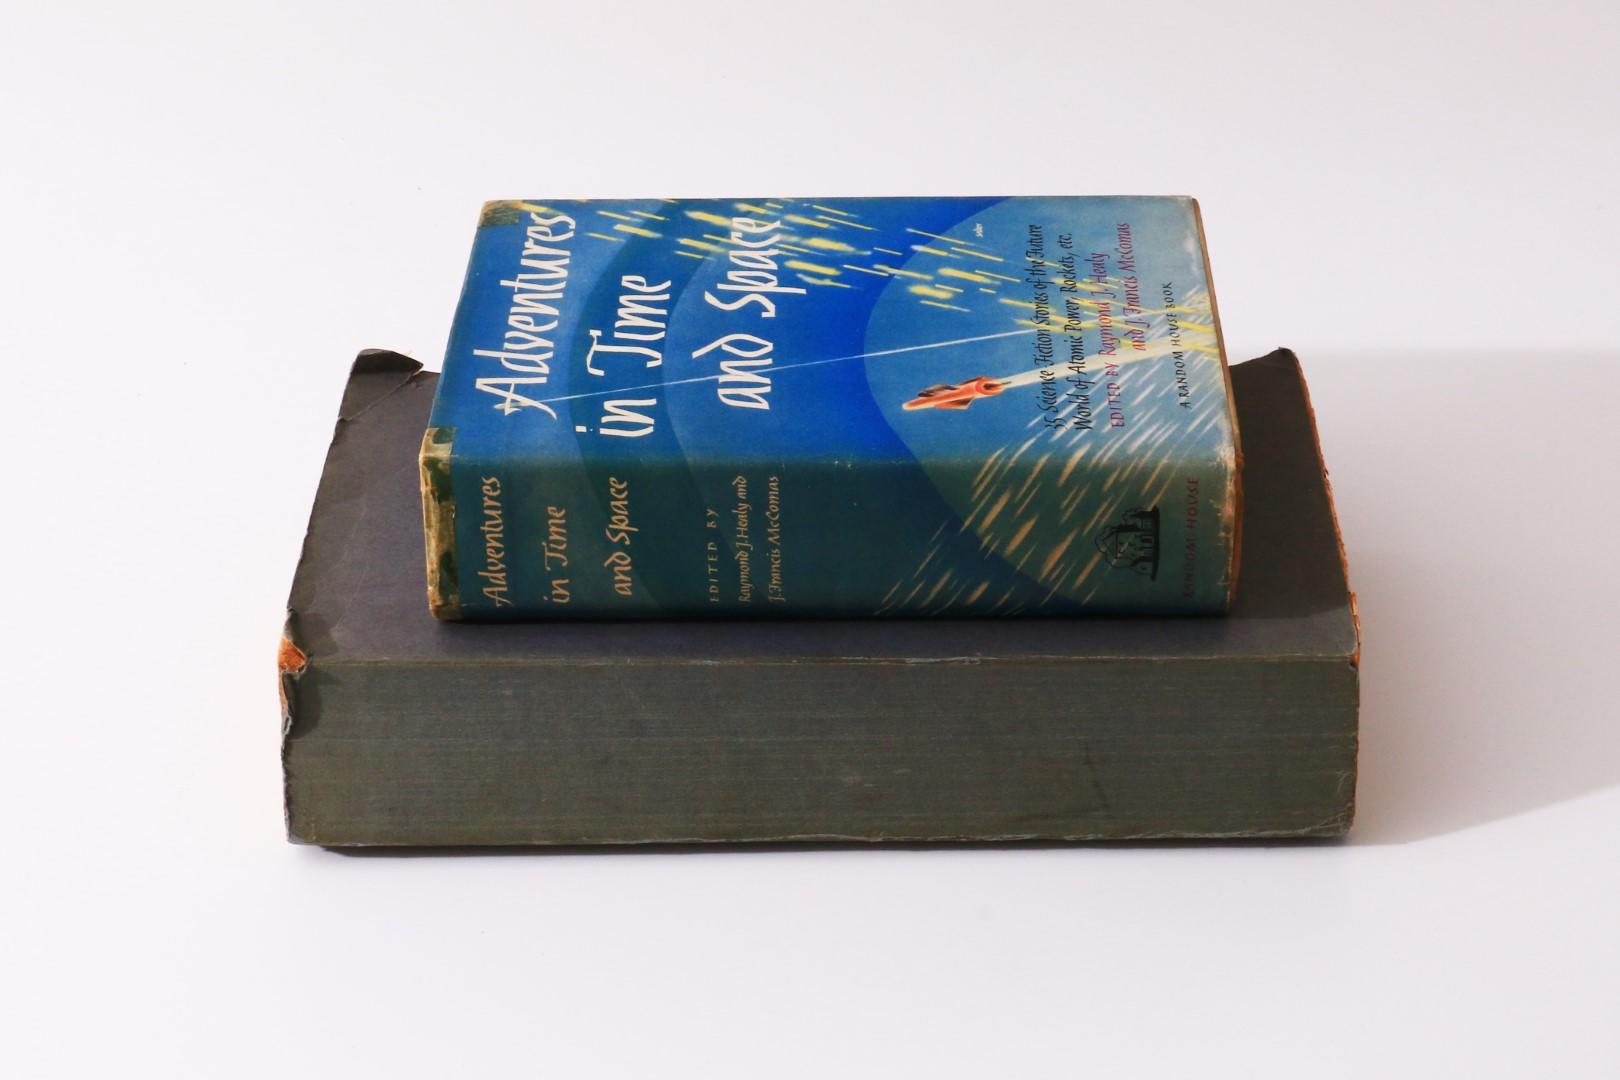 Raymond J. Healy & J. Francis McComas - Adventures in Time and Space w/ Proof - Random House, 1946, First Edition.